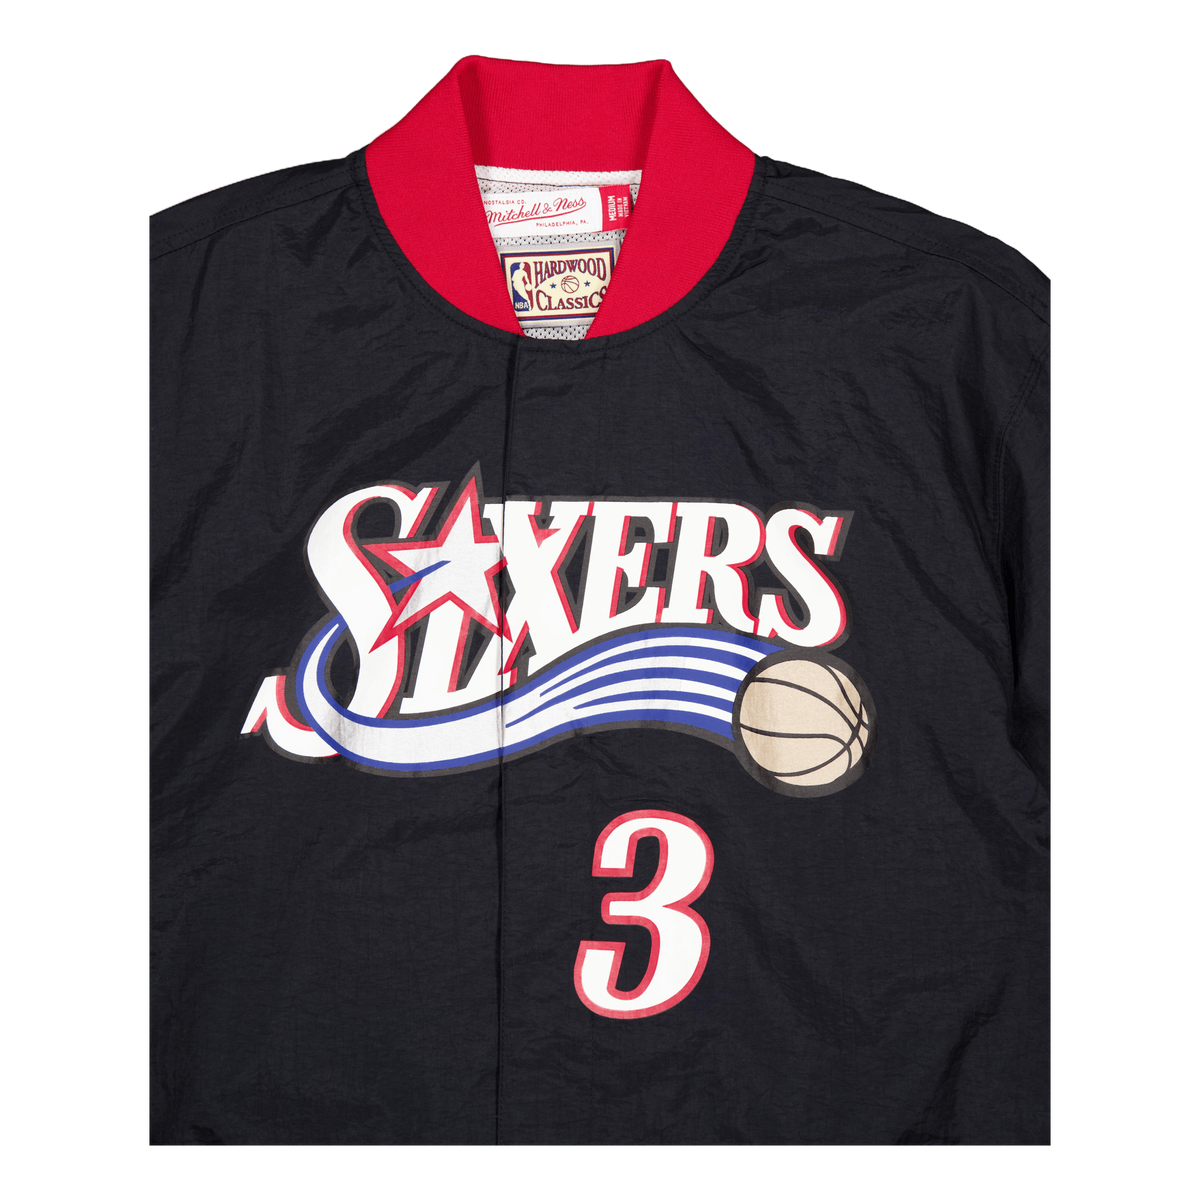 76ers Off Court Ss Name & Numb Black